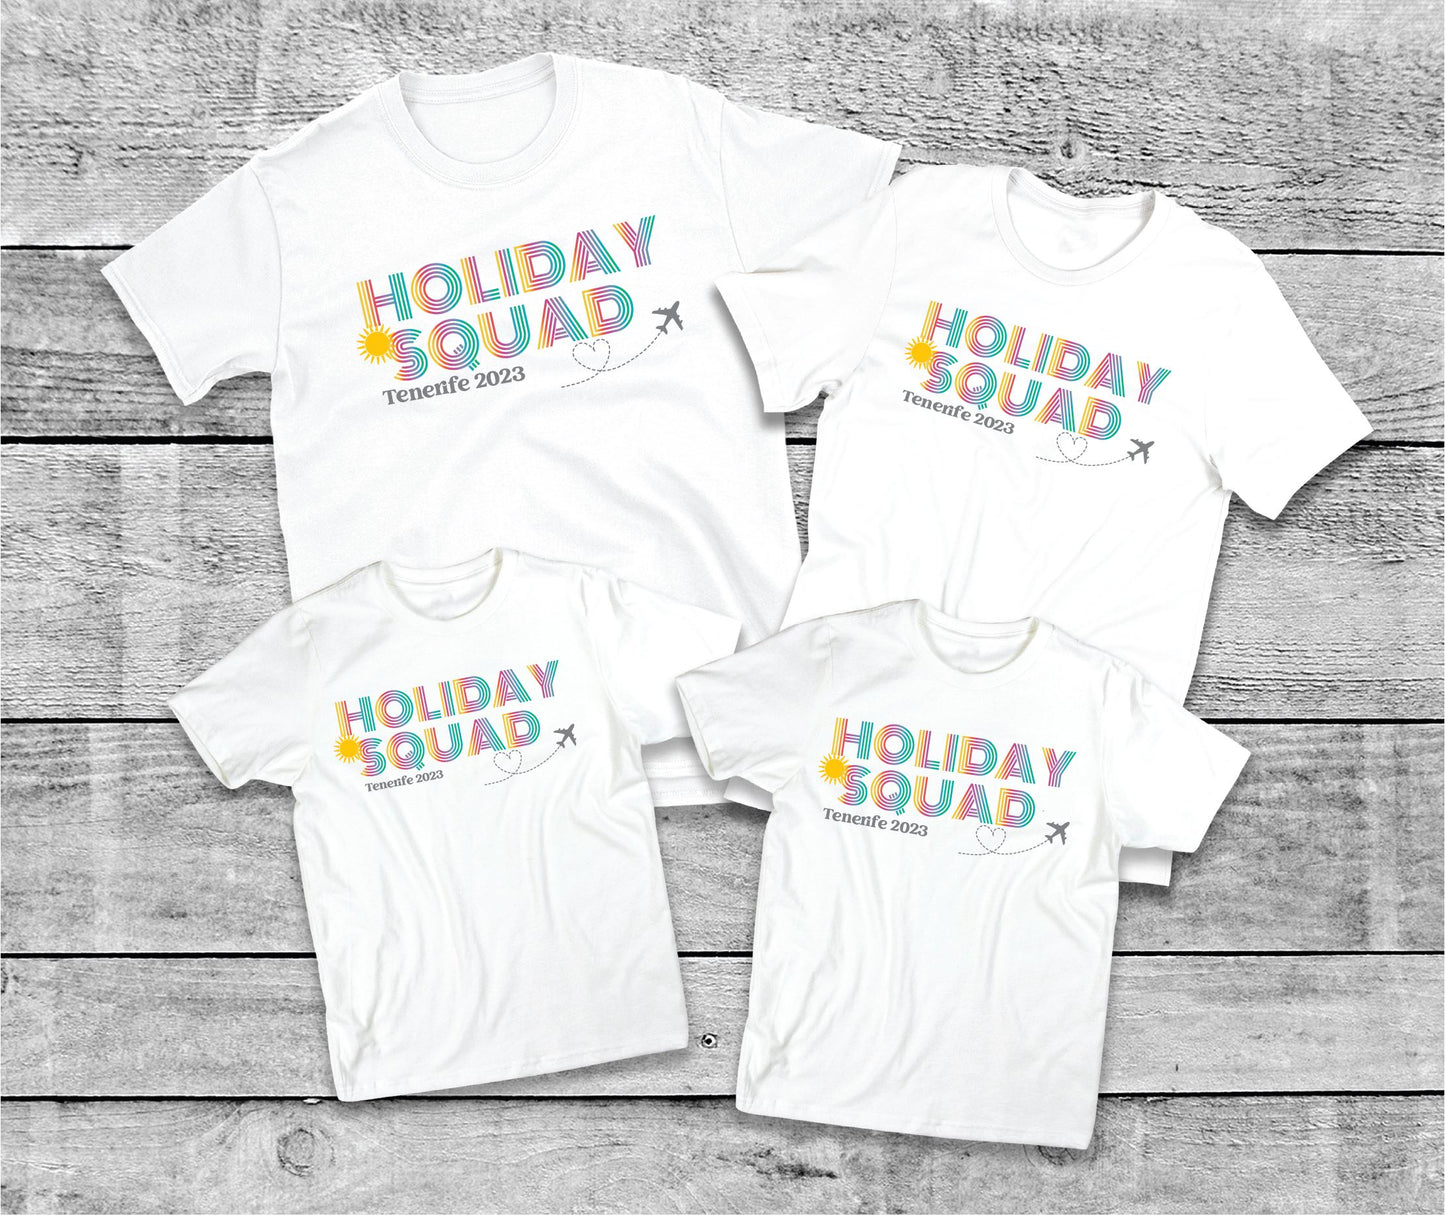 Family Matching Holiday Squad 2023 T-shirts